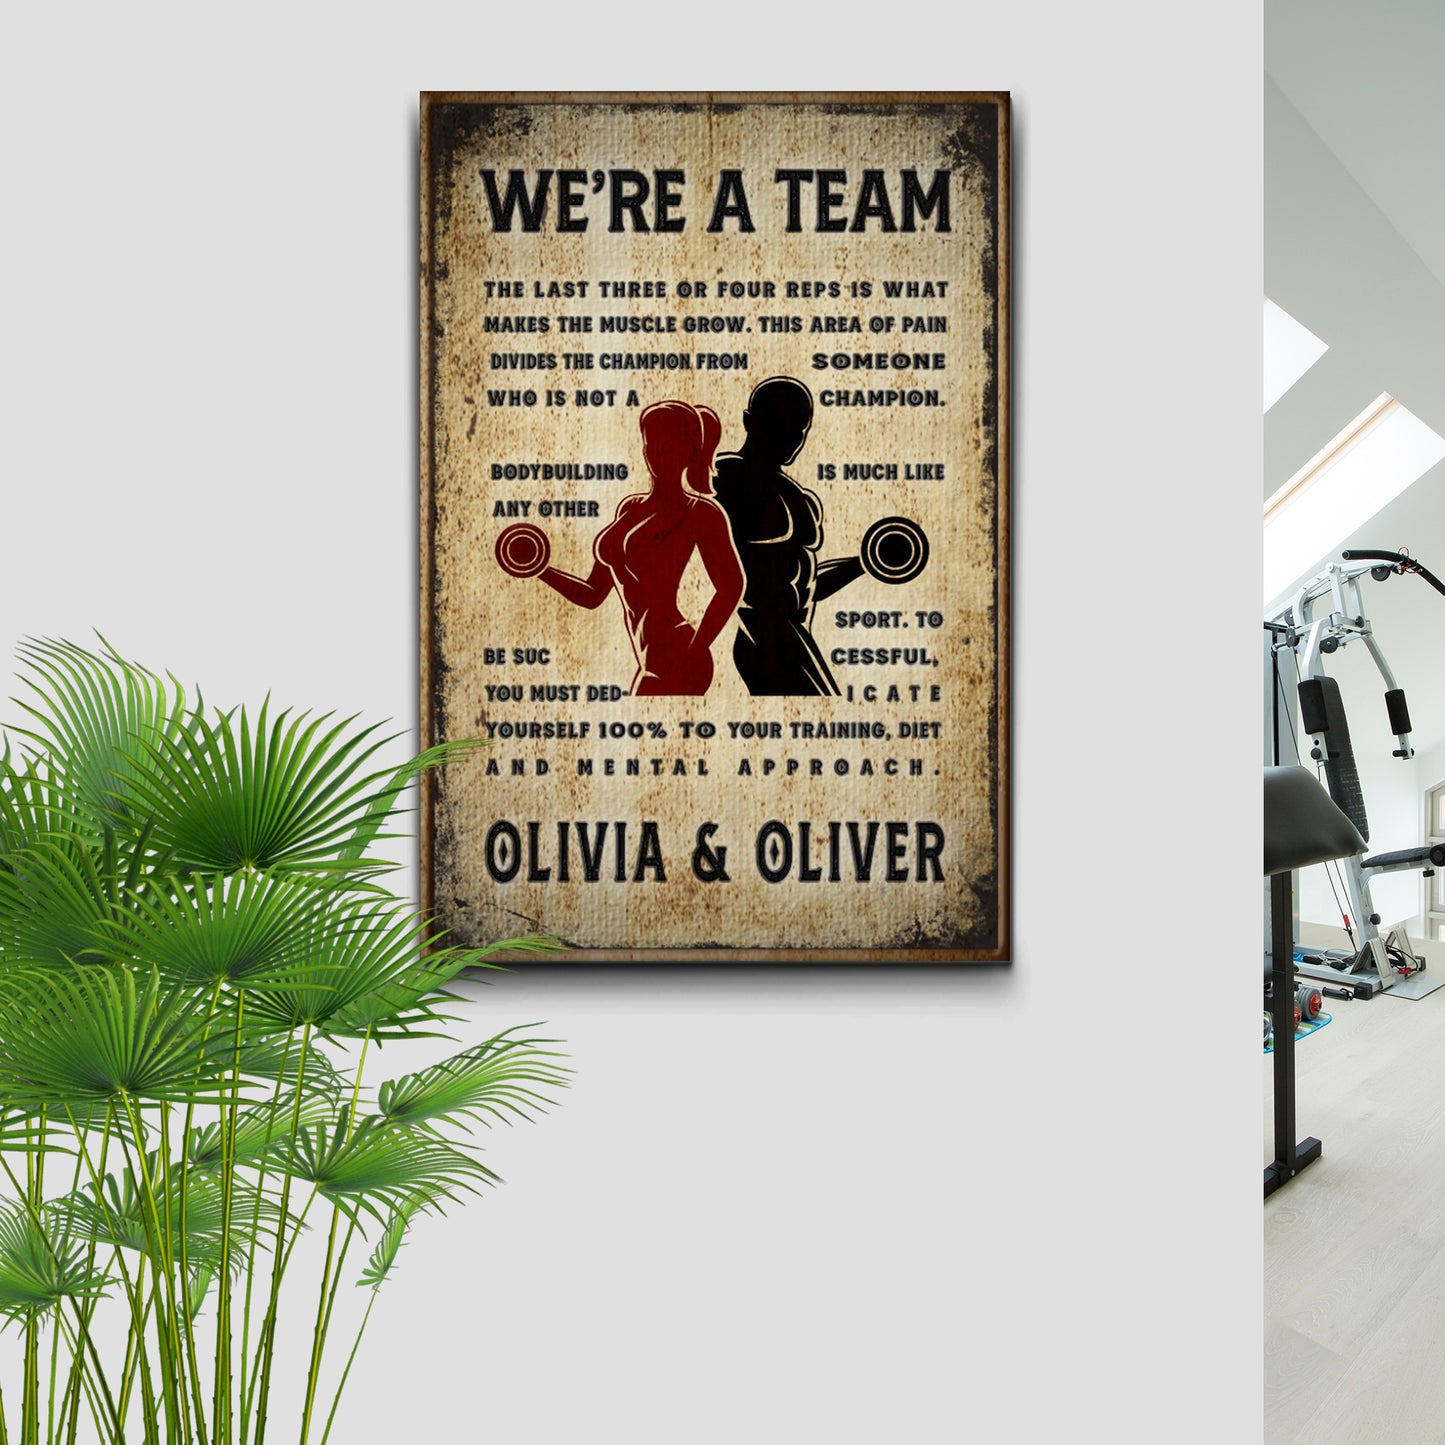 We're A Team Motivation Sign Style 2 - Image by Tailored Canvases